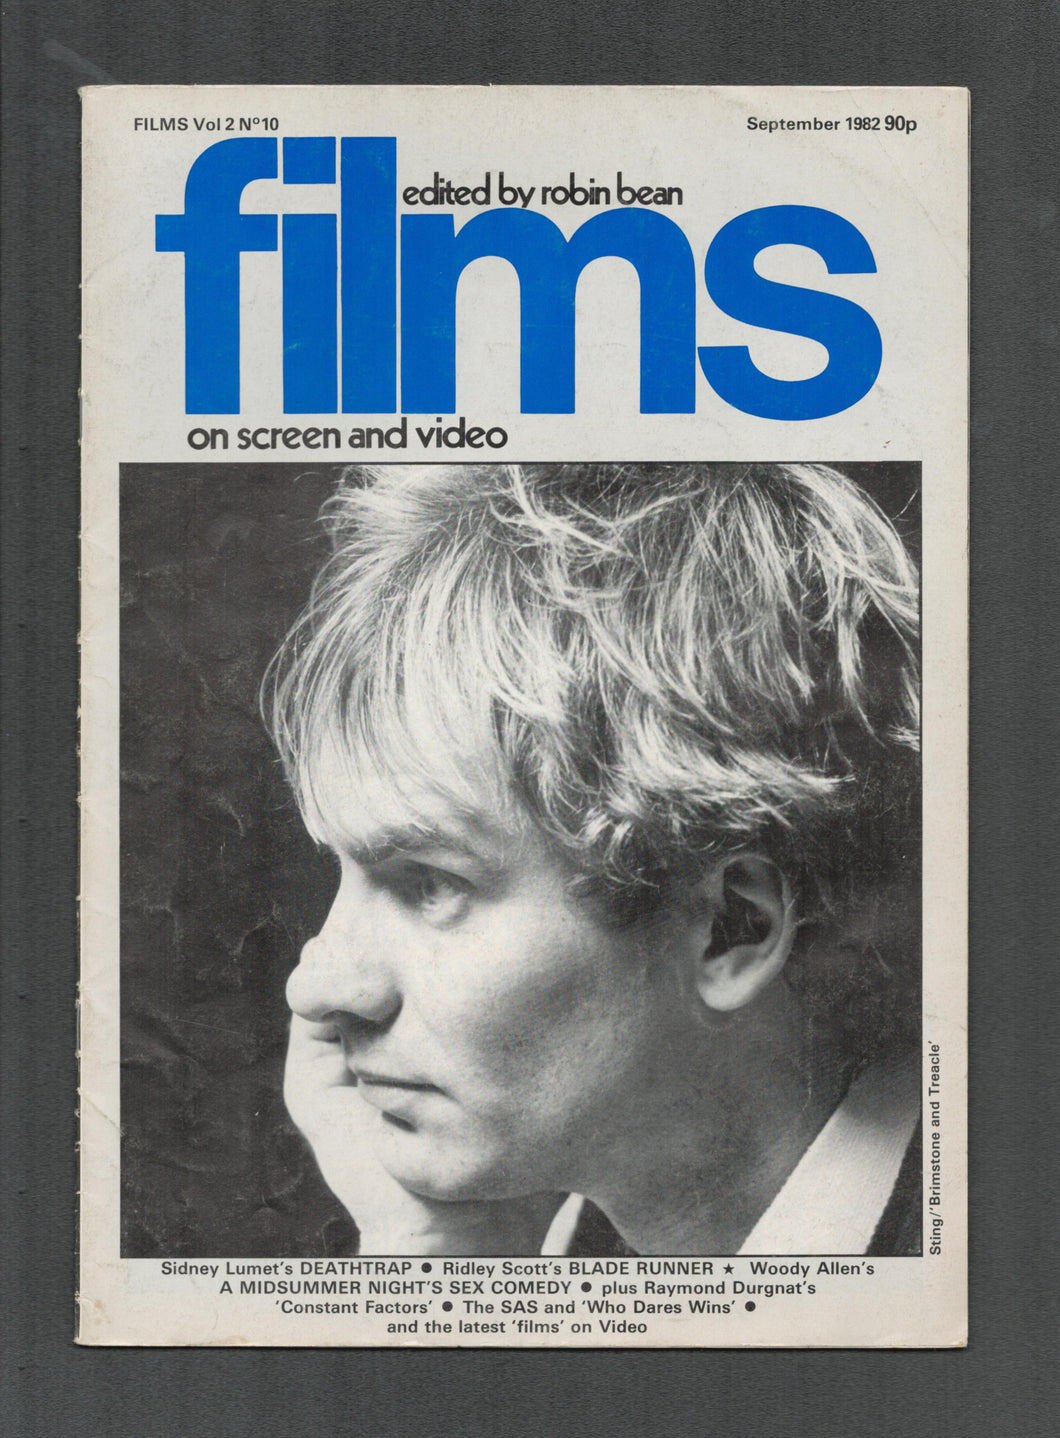 Films On Screen and Video Vol 2 No 10 Sept 1982